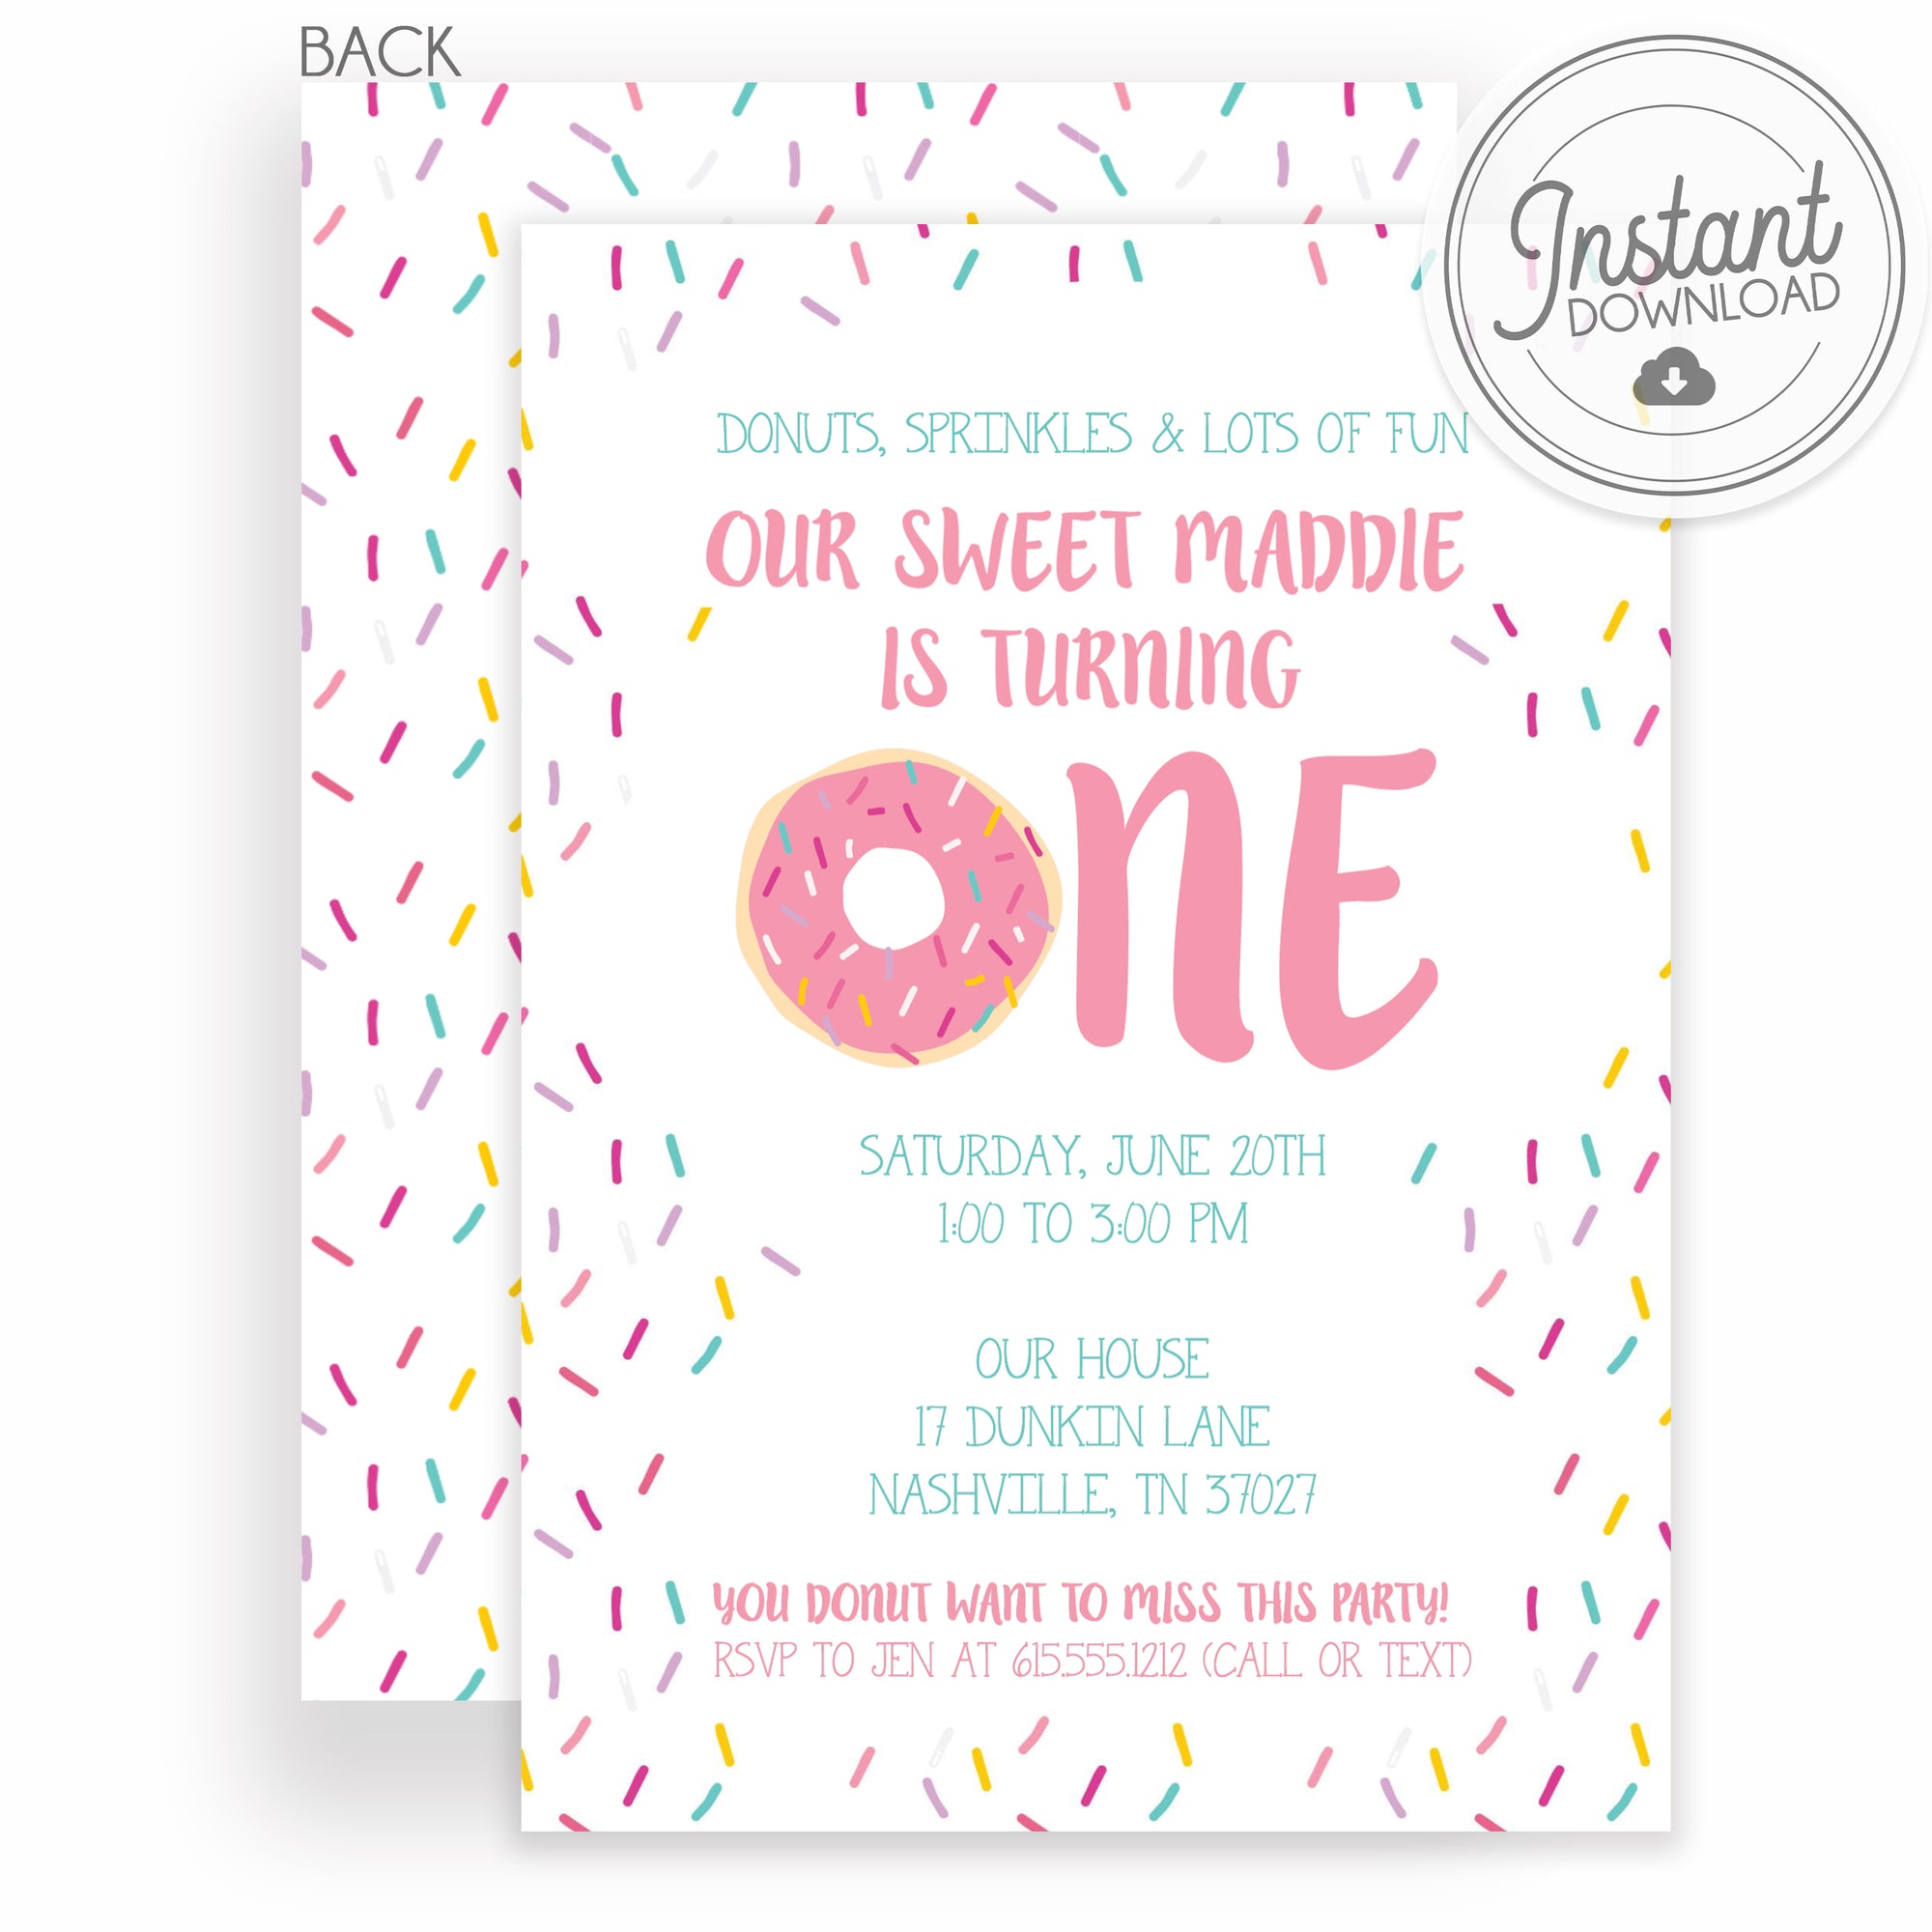 ONE donut first birthday invitation with pink sprinkles | PIPSY.COM